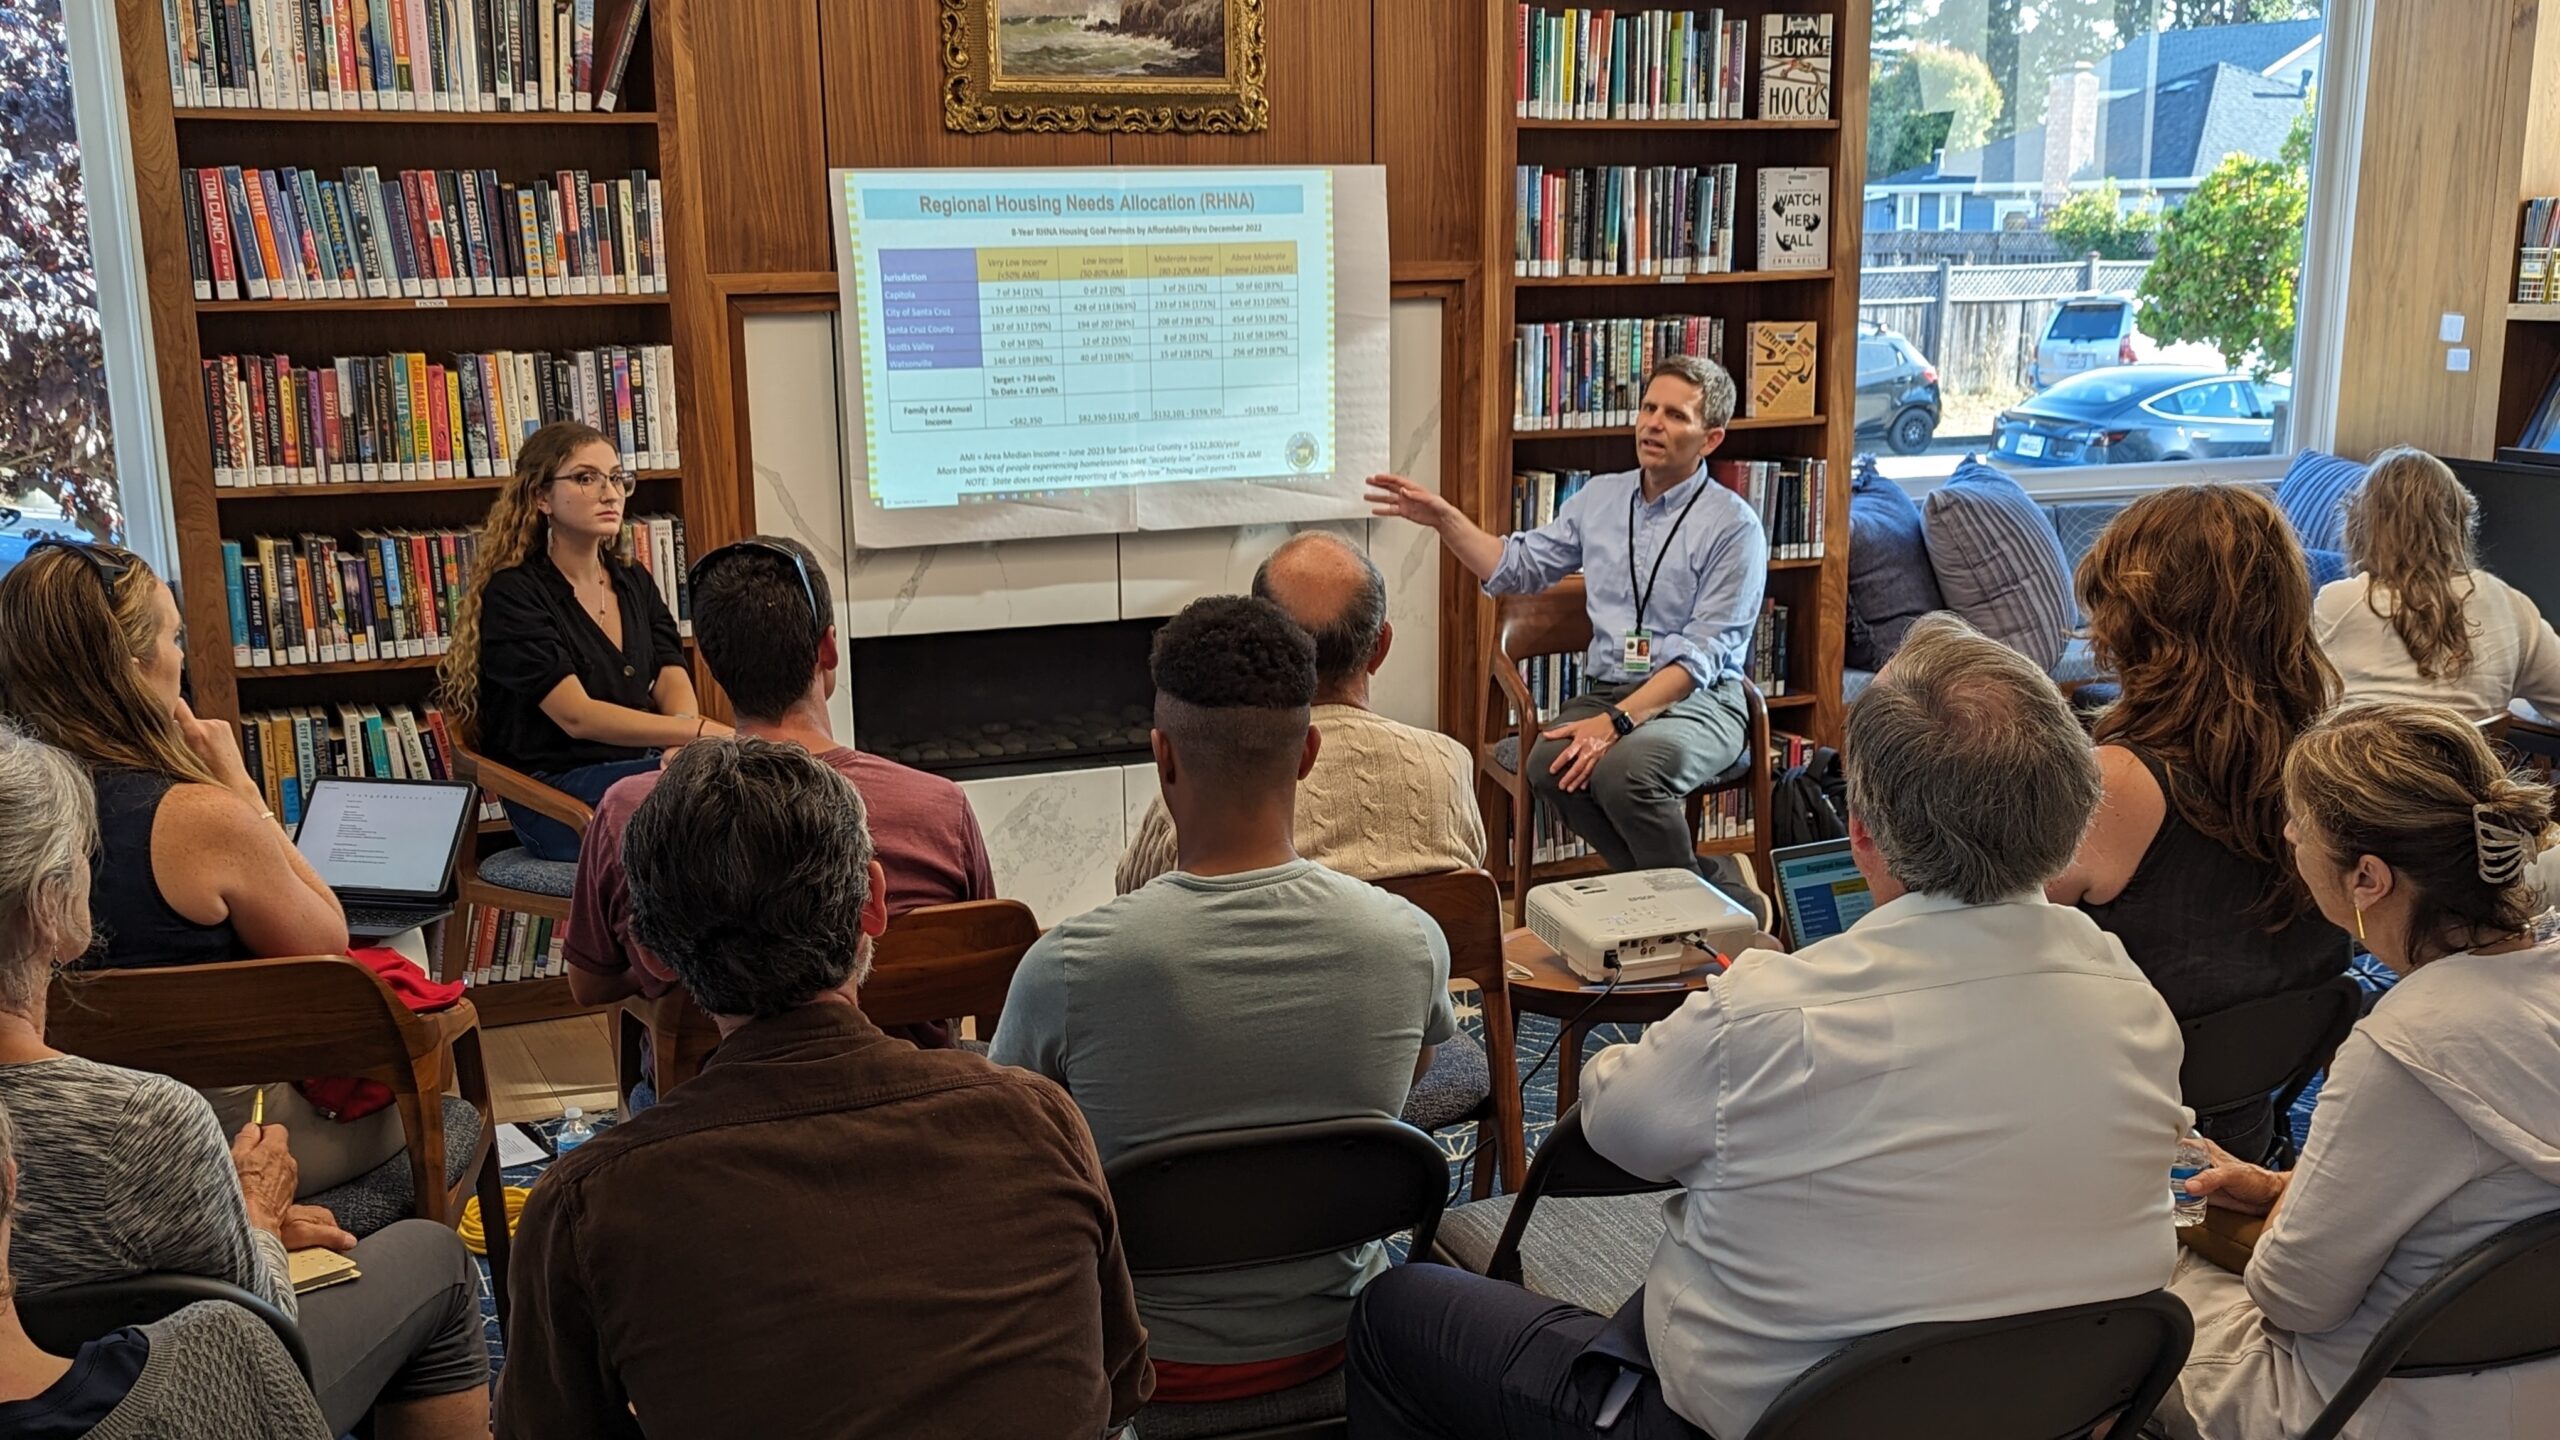 Robert Ratner sits in front of community members, speaking about solutions to homelessness at Garfield Park Branch Library in Santa Cruz on Aug. 17.